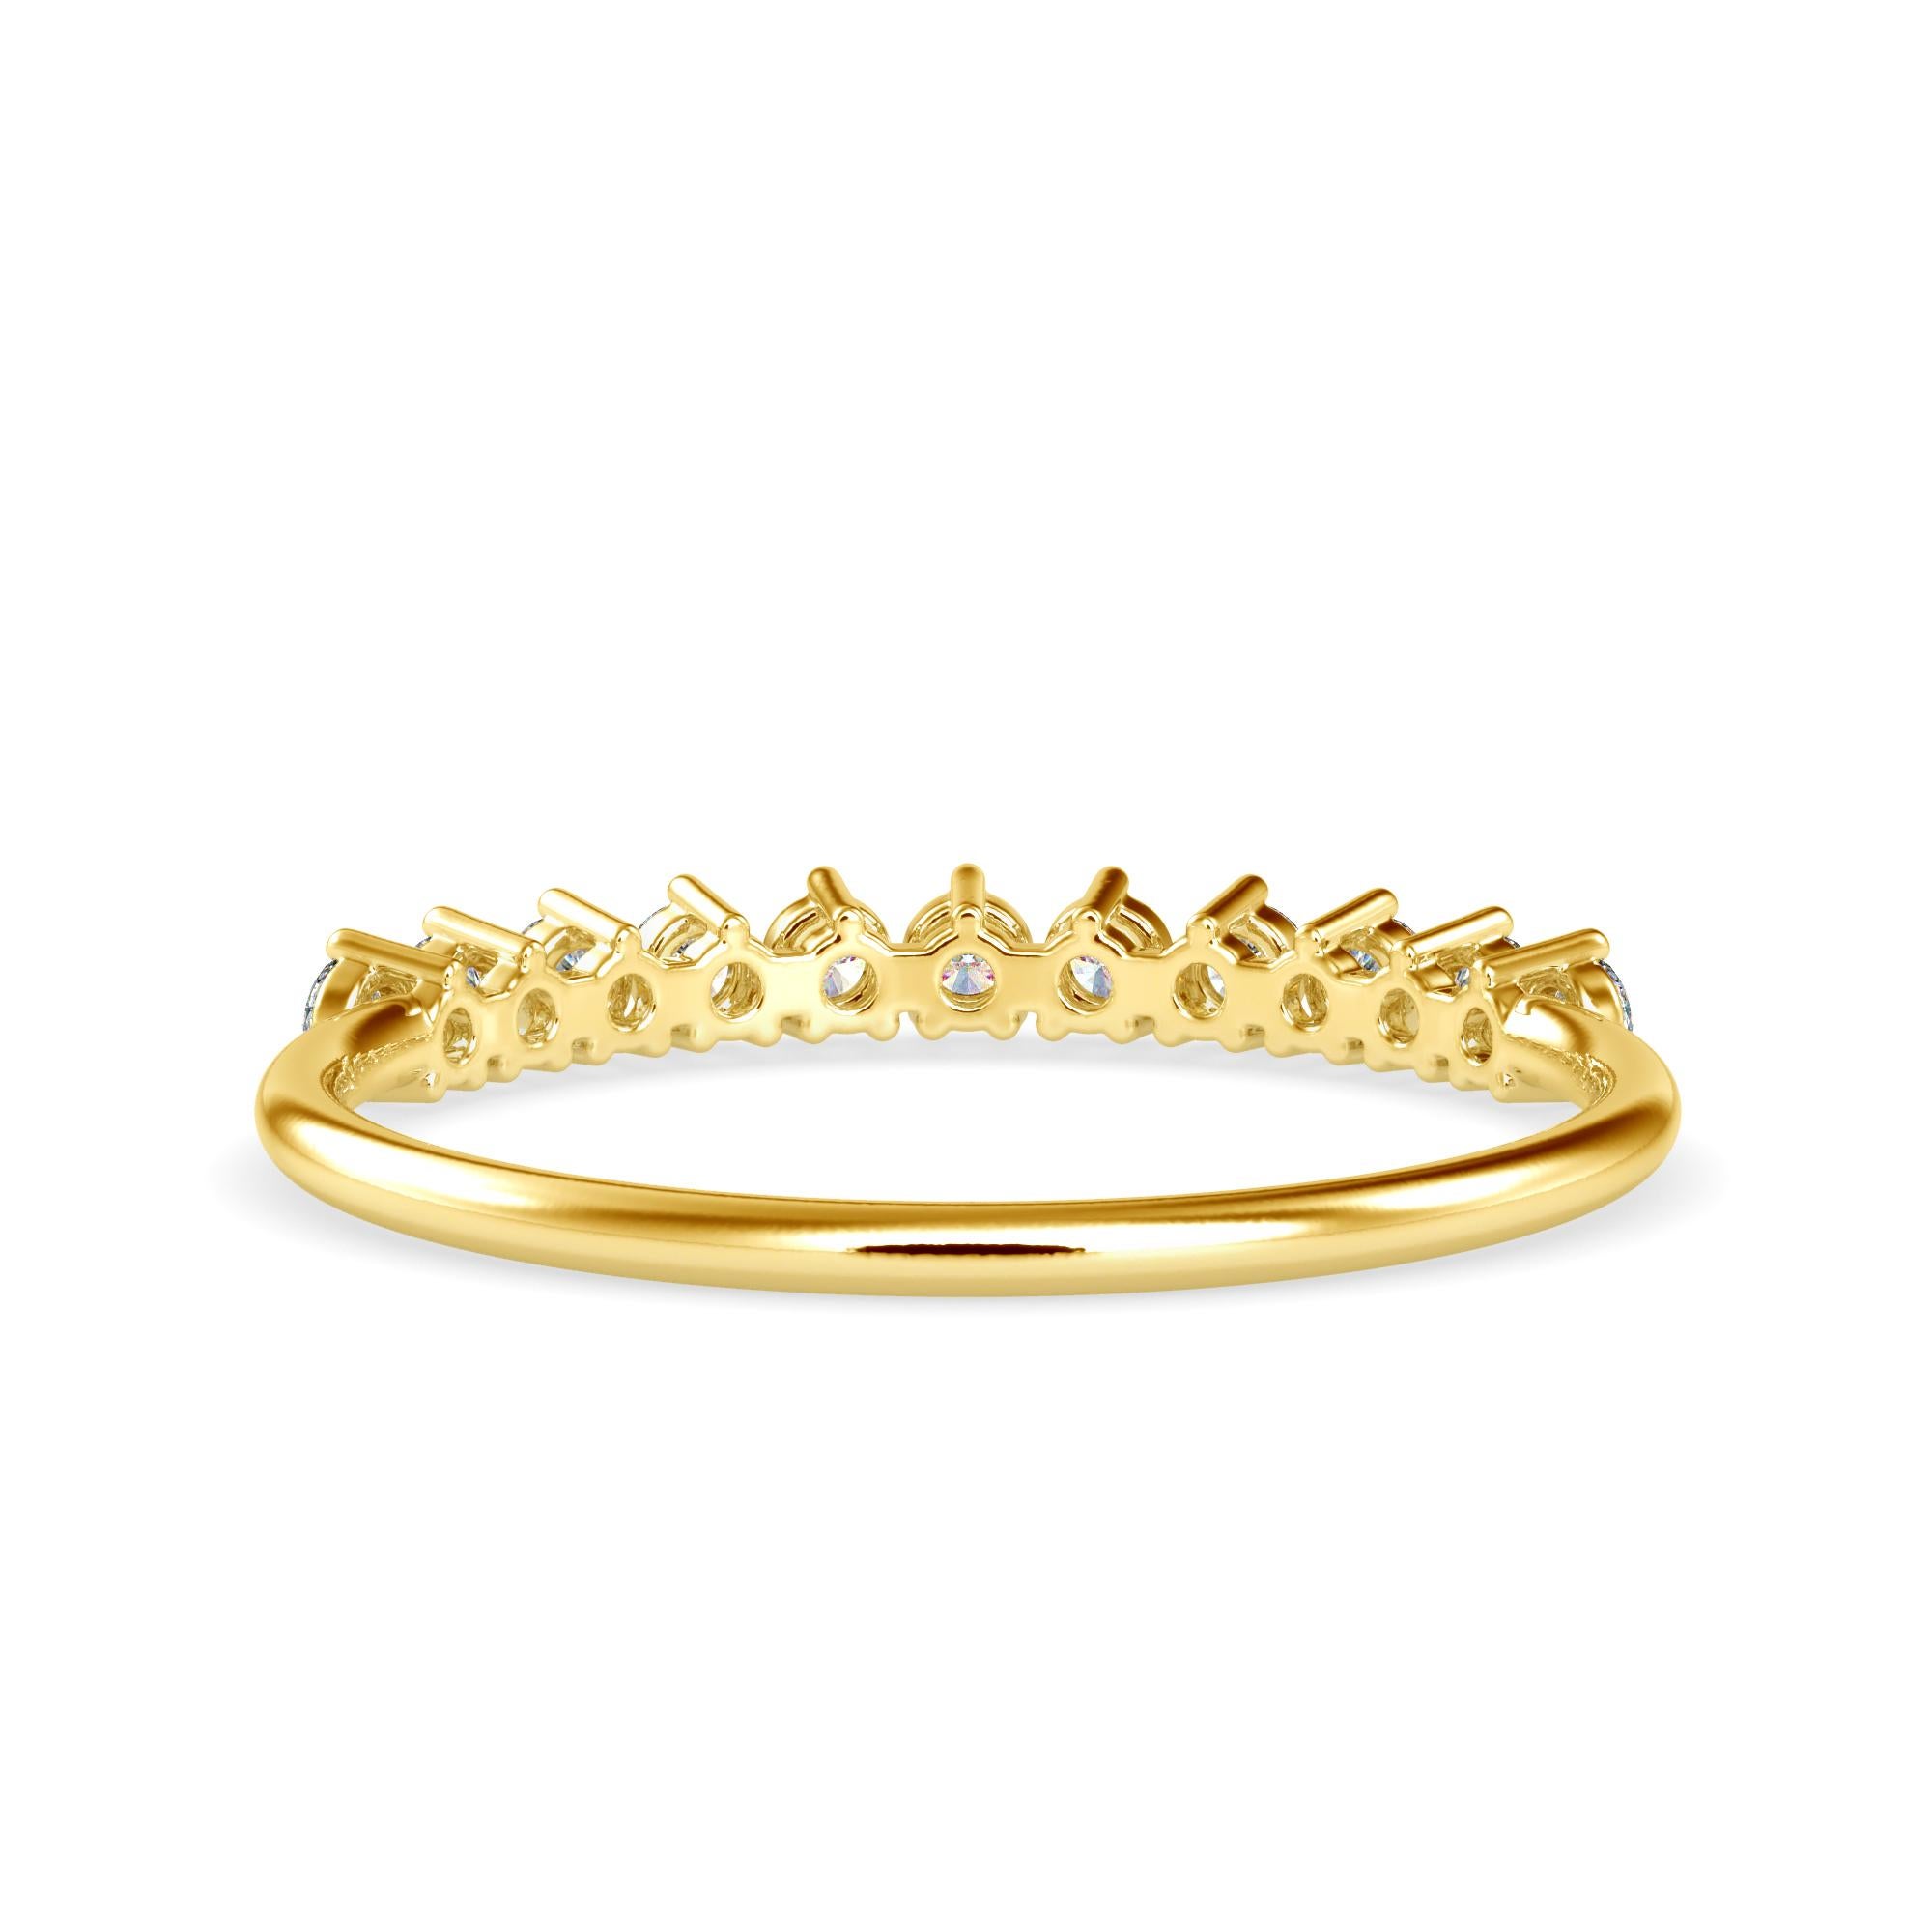 0.24 Carat Diamond 14K Yellow Gold Ring
Stamped: 14K
Total Ring Weight: 1.2 Grams
Diamond Weight: 0.24 Carat (F-G Color, VS2-SI1 Clarity) 1.8 Millimeters 
Diamond Quantity: 11
SKU: [500021]

